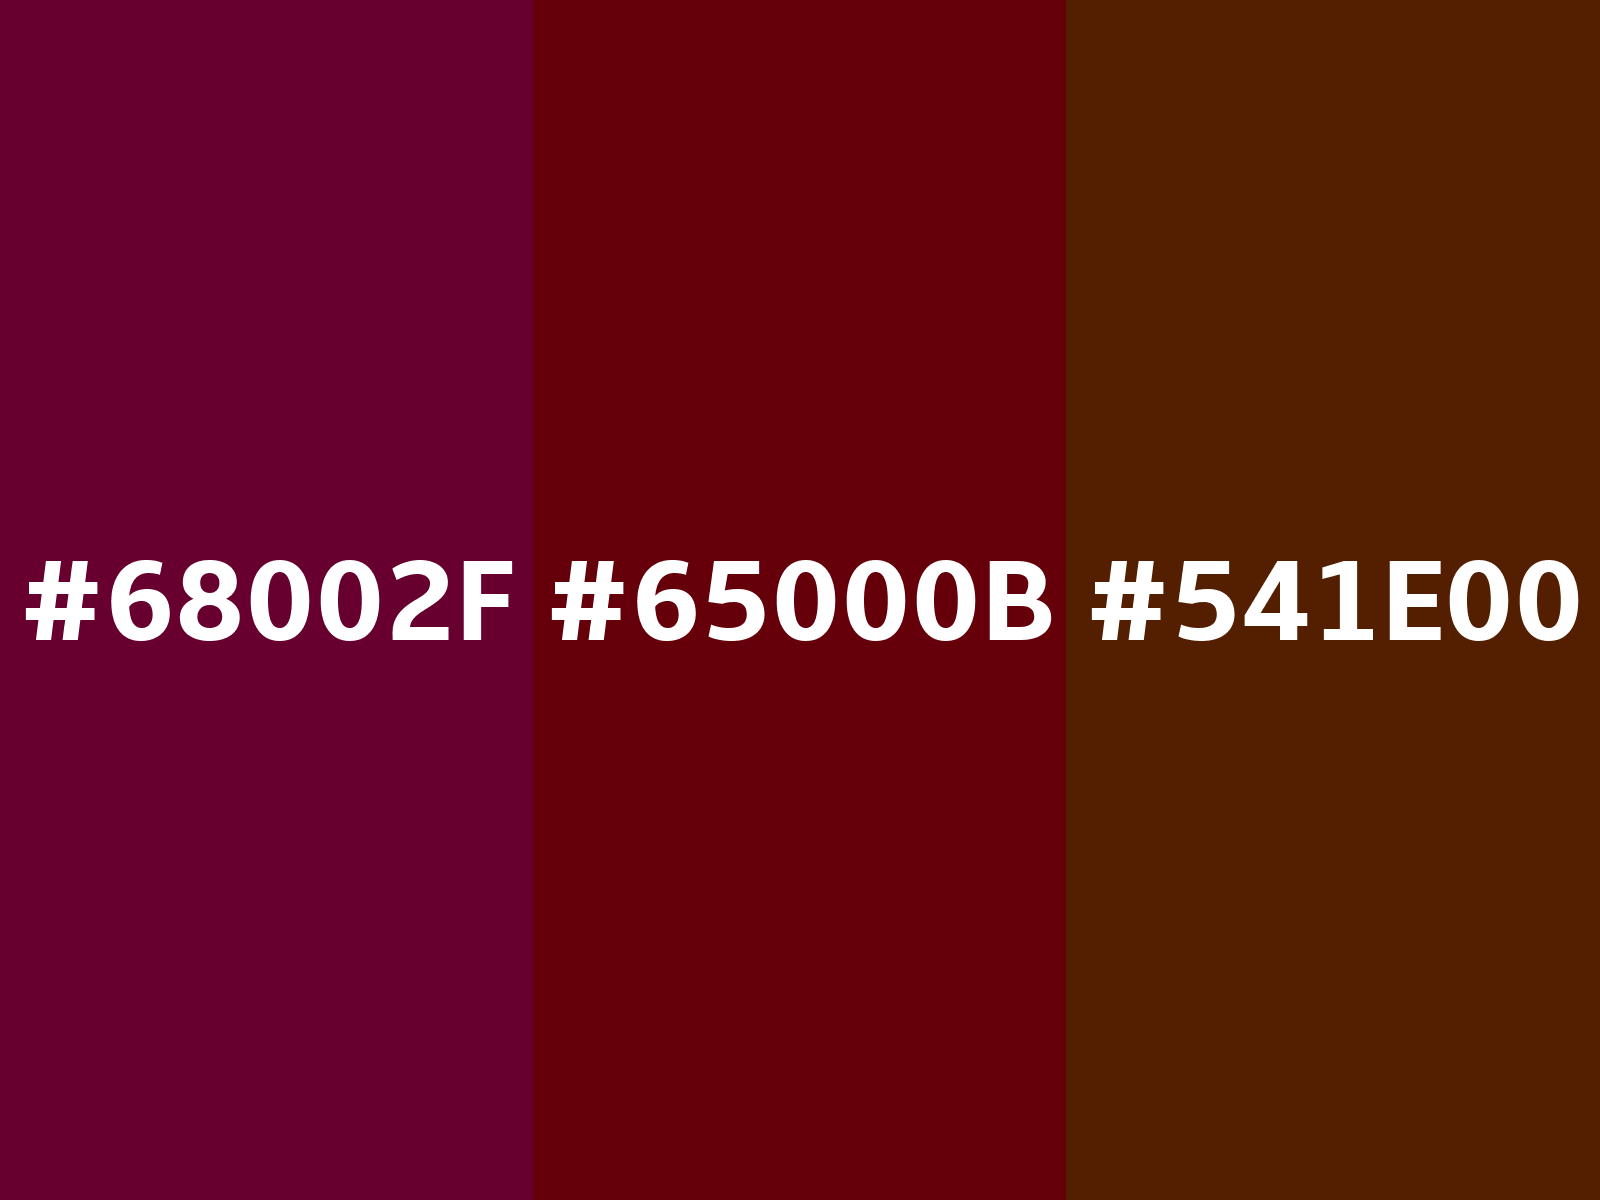 colorswall on X: Shades Metro UI Color Dark Red #b91d47 hex #a71a40,  #941739, #821432, #6f112b, #5d0f24, #4a0c1c, #380915, #25060e, #120307,  #000000 #colors #palette   /  X